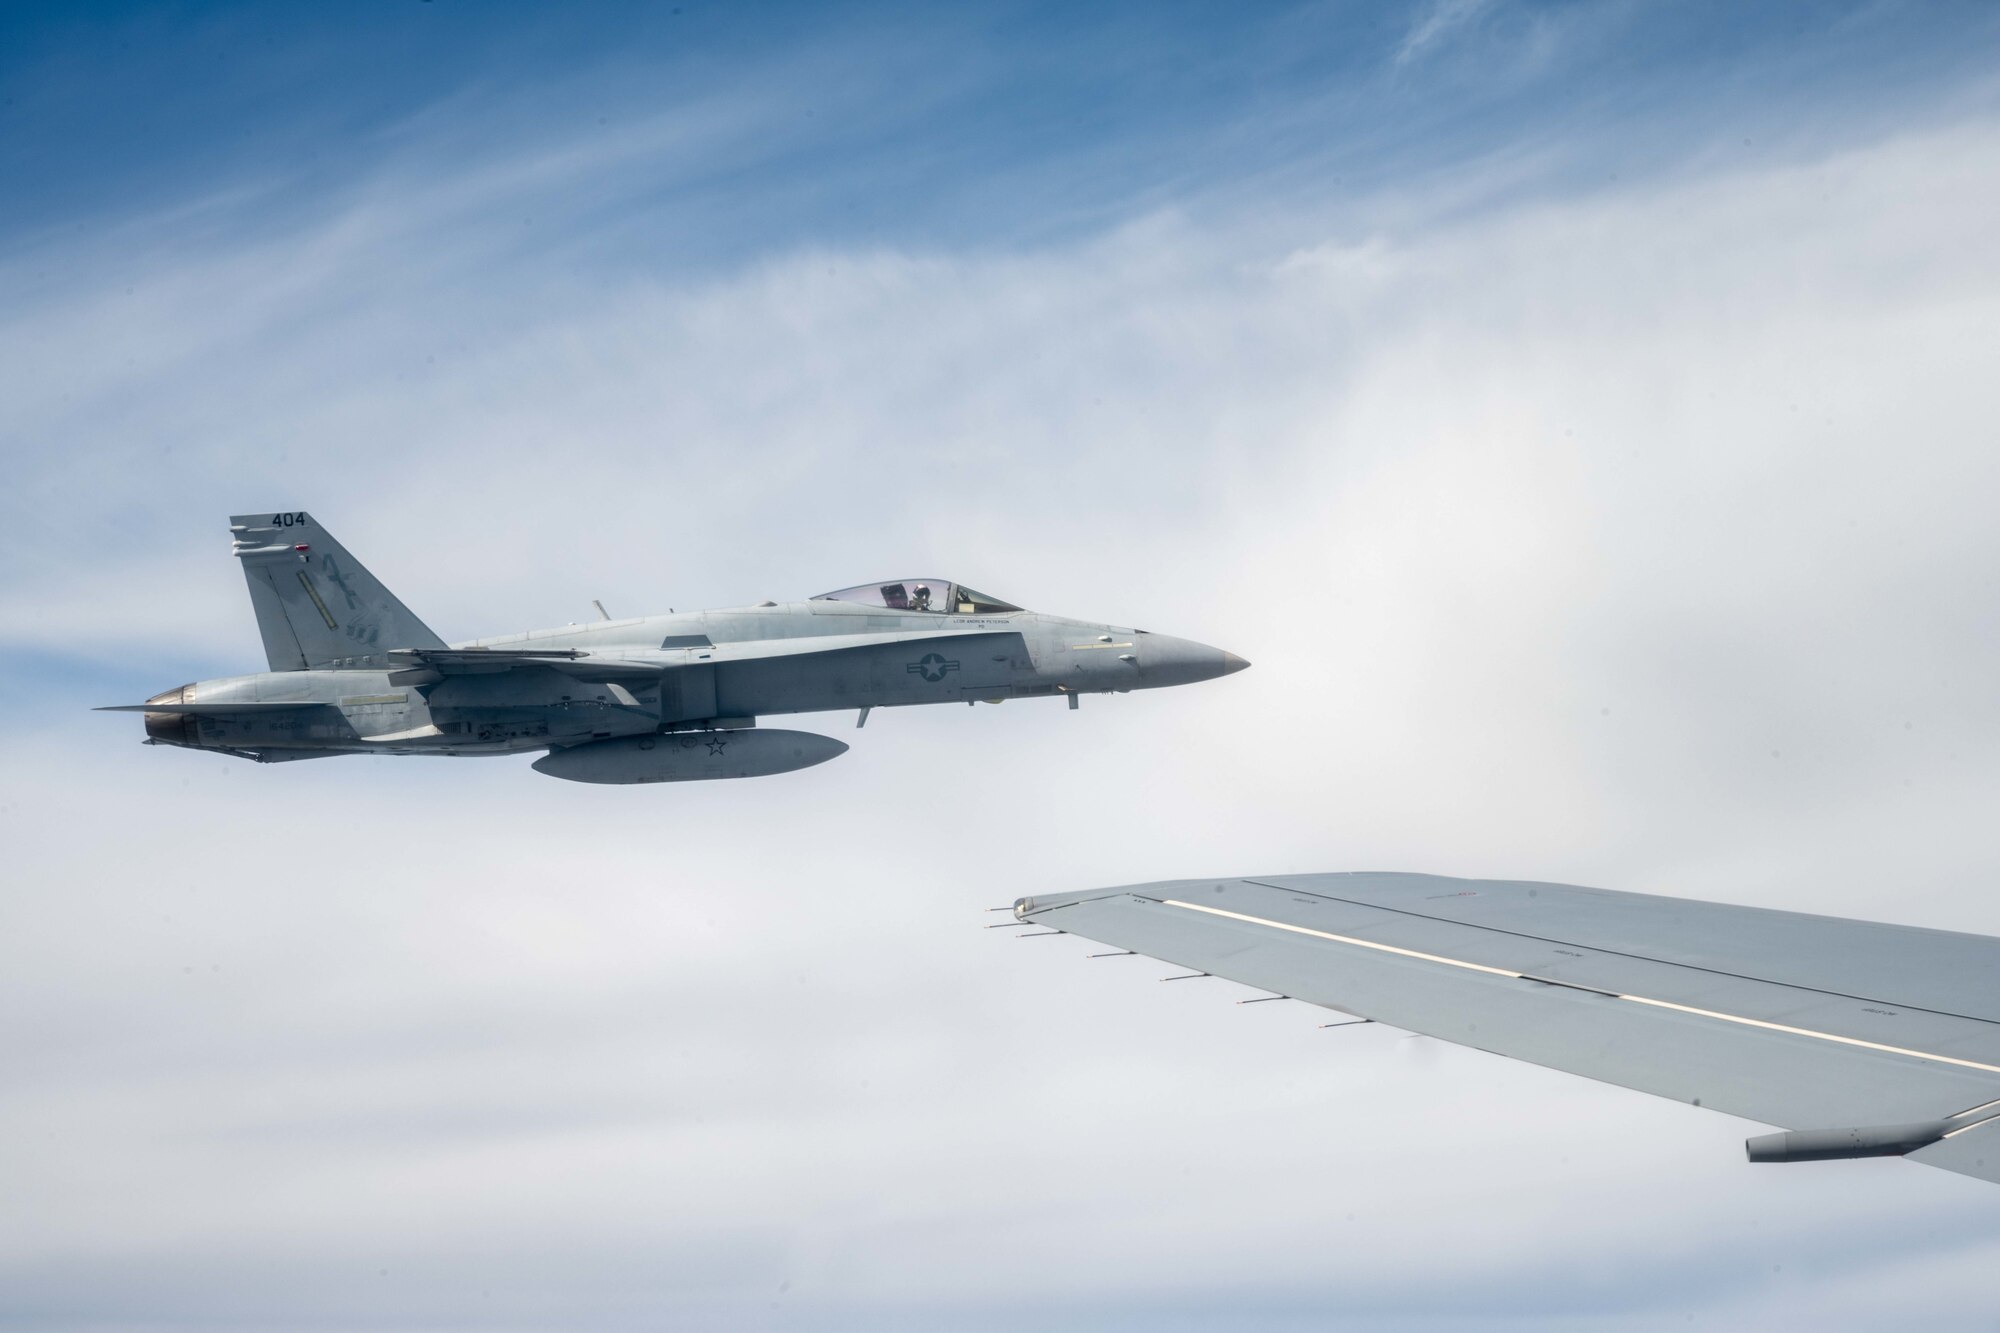 F/A-18 Hornets from Marine Fighter Attack Squadron 112, Fort Worth, Texas, fly in formation with a KC-46A Pegasus from the 22nd Air Refueling Wing, McConnell Air Force Base, Kansas, after being refueled by the aircraft Aug. 11, 2021.